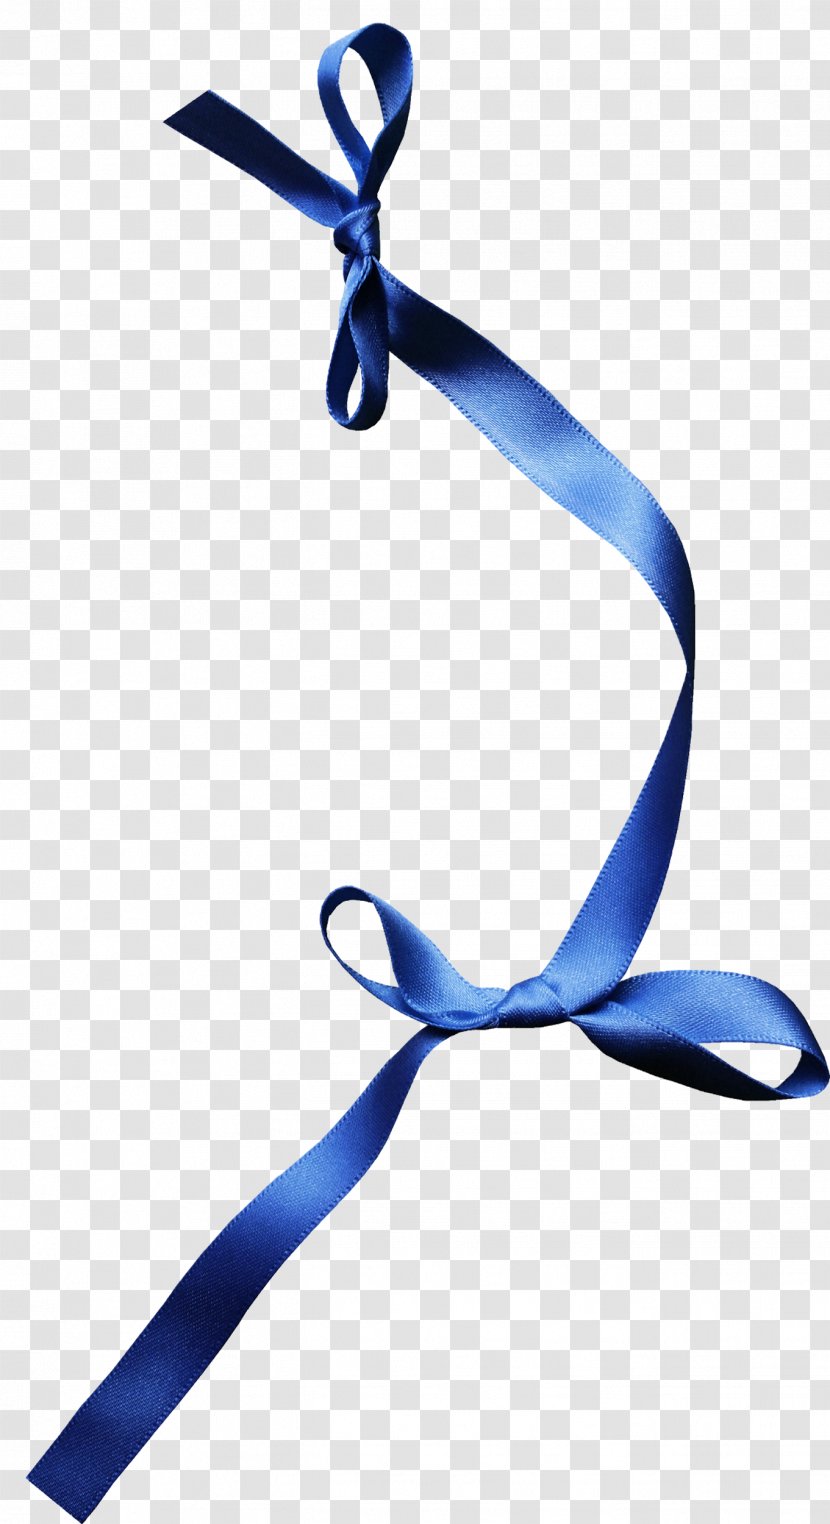 White Ribbon - Clothing Accessories Transparent PNG